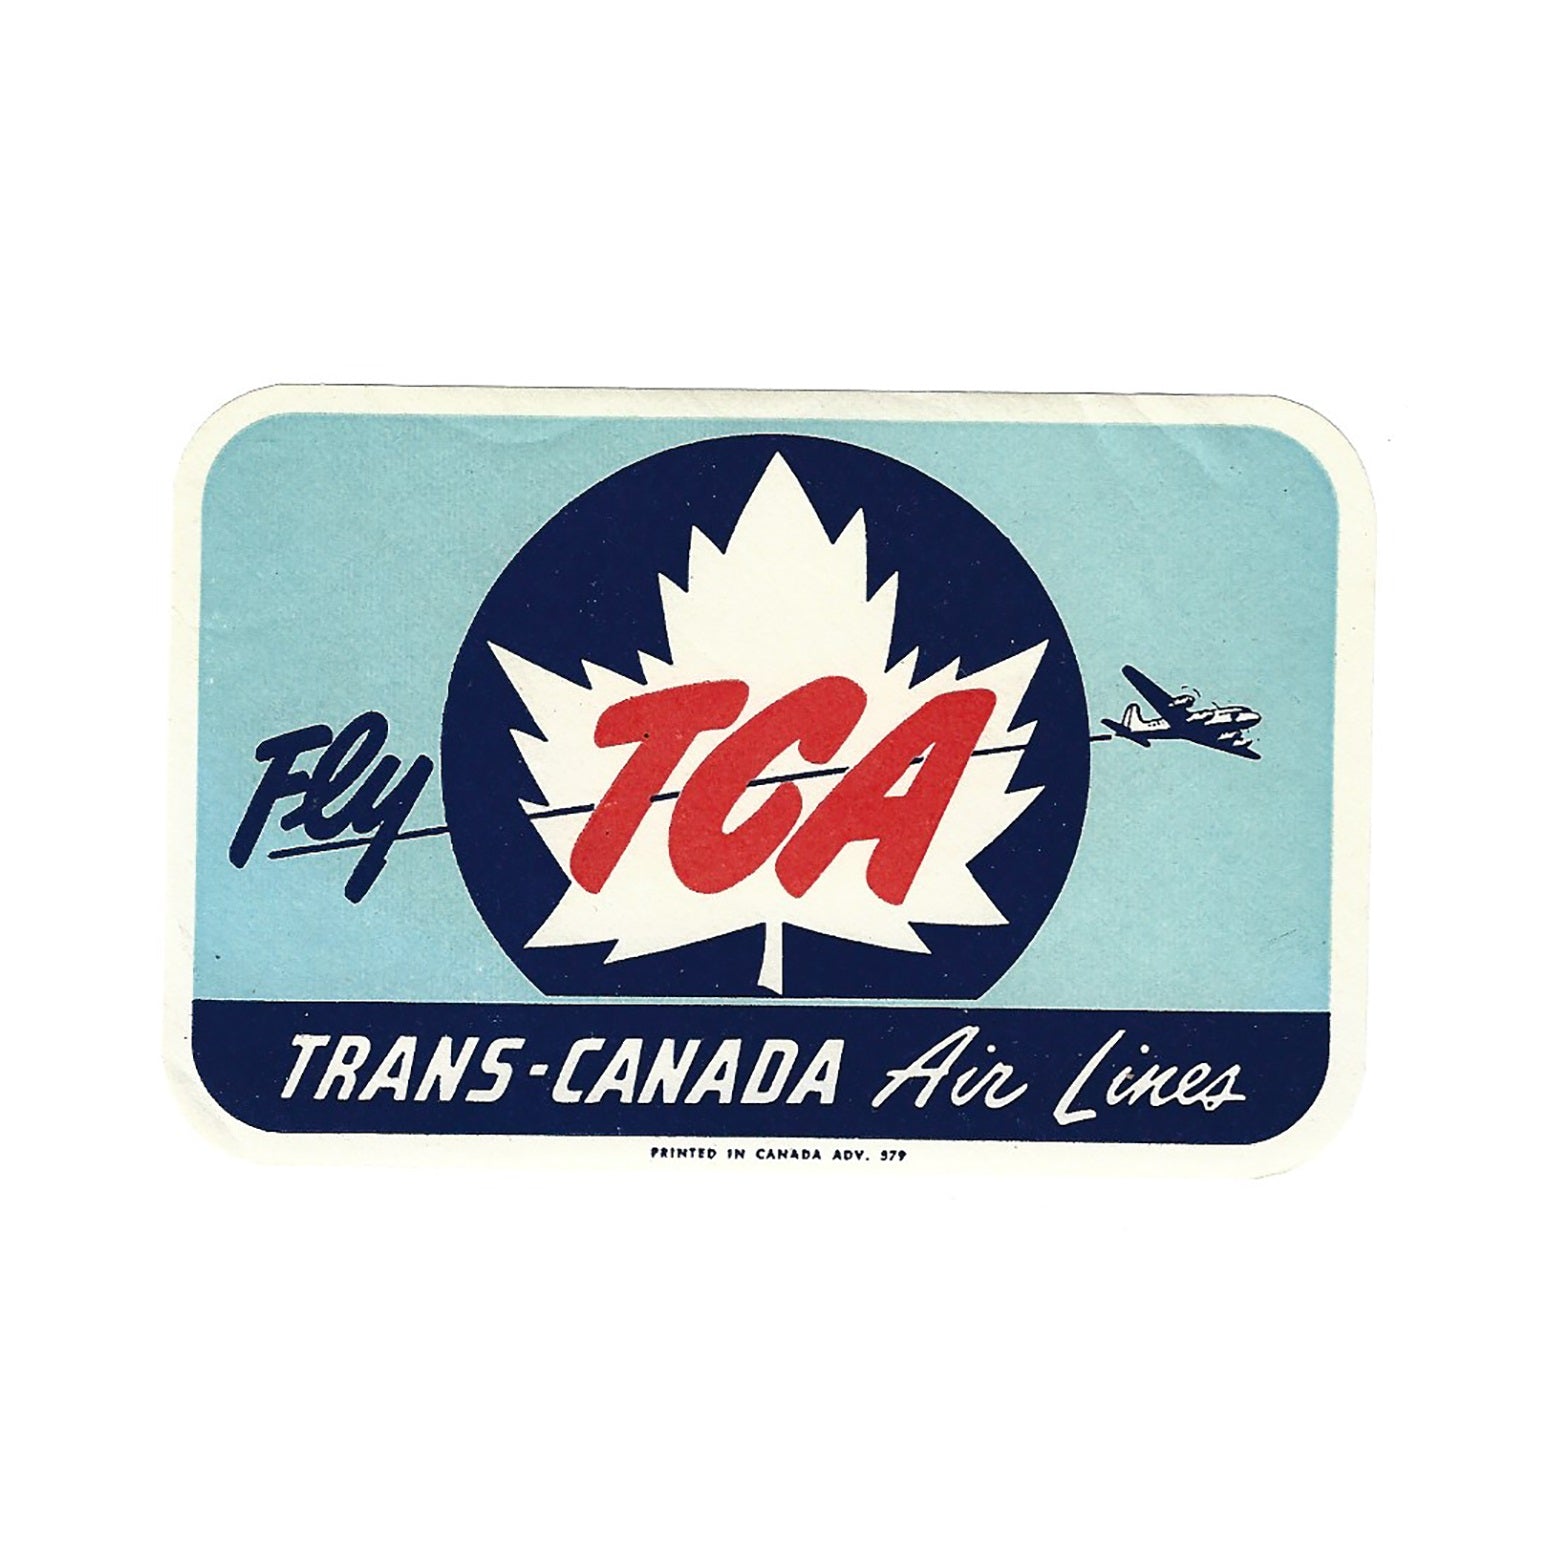 Trans-Canada Air Lines. Fly TCA (luggage label)